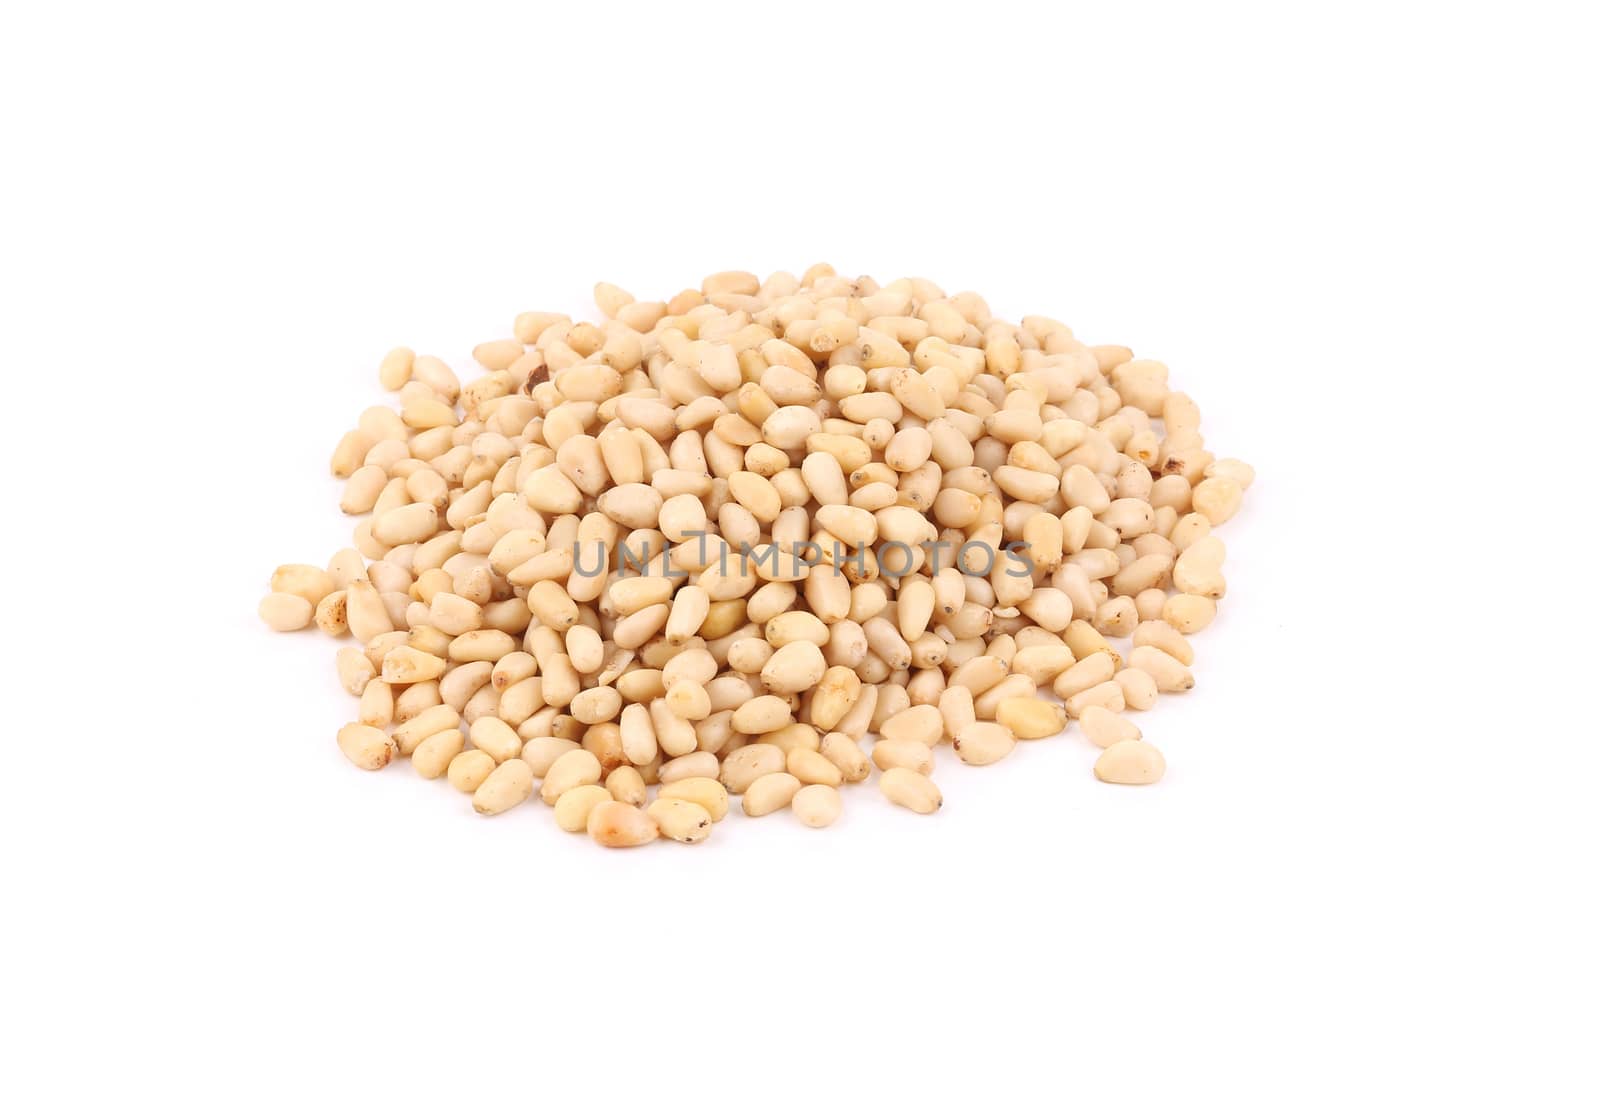 Bunch of pine nuts. Isolated on a white background.